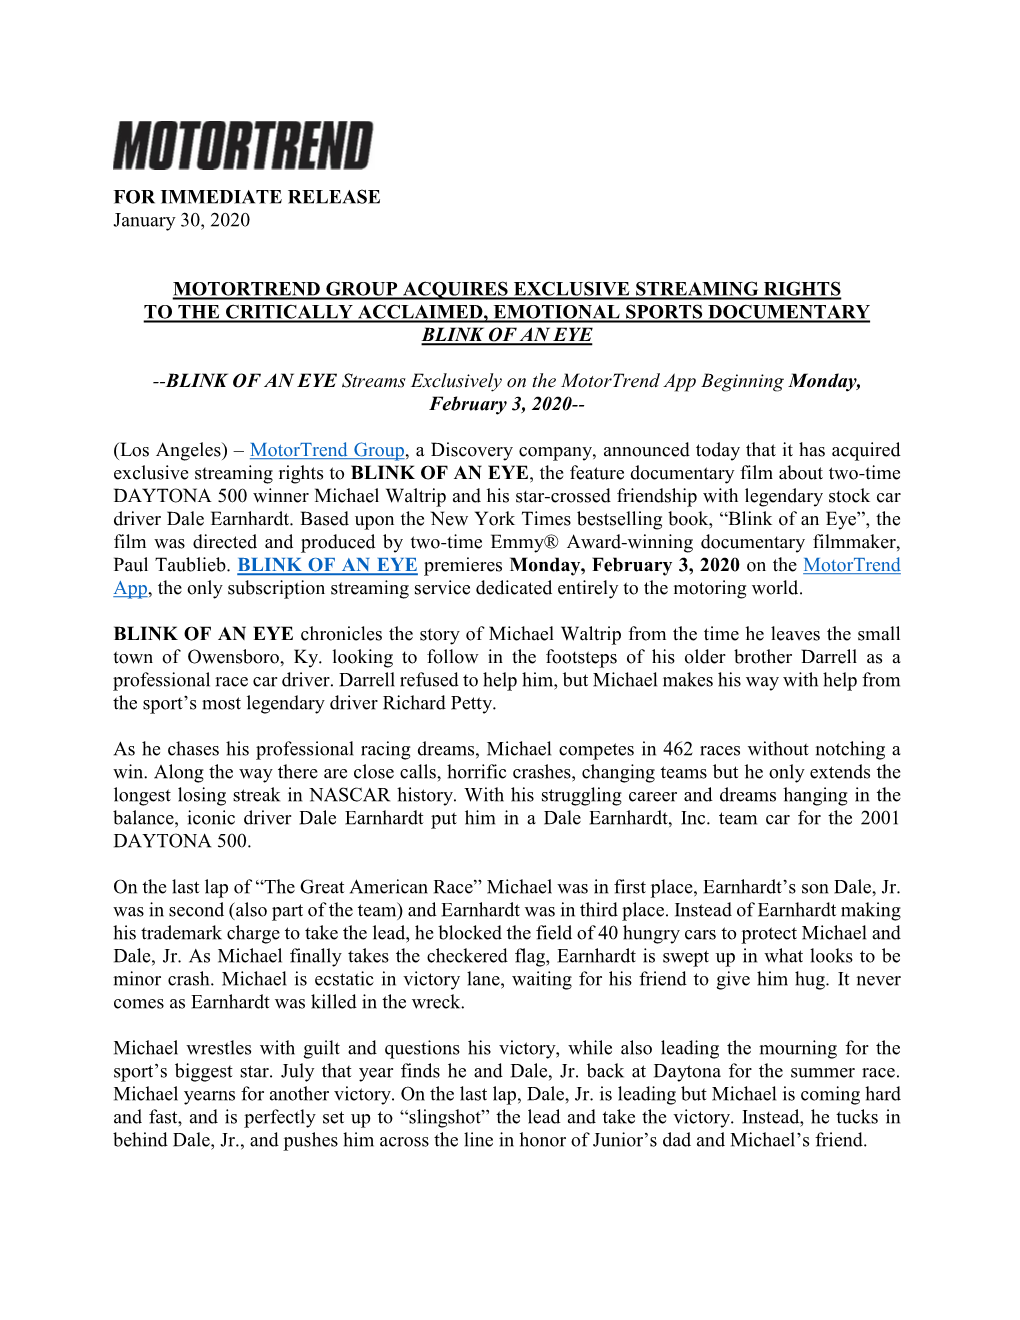 FOR IMMEDIATE RELEASE January 30, 2020 MOTORTREND GROUP